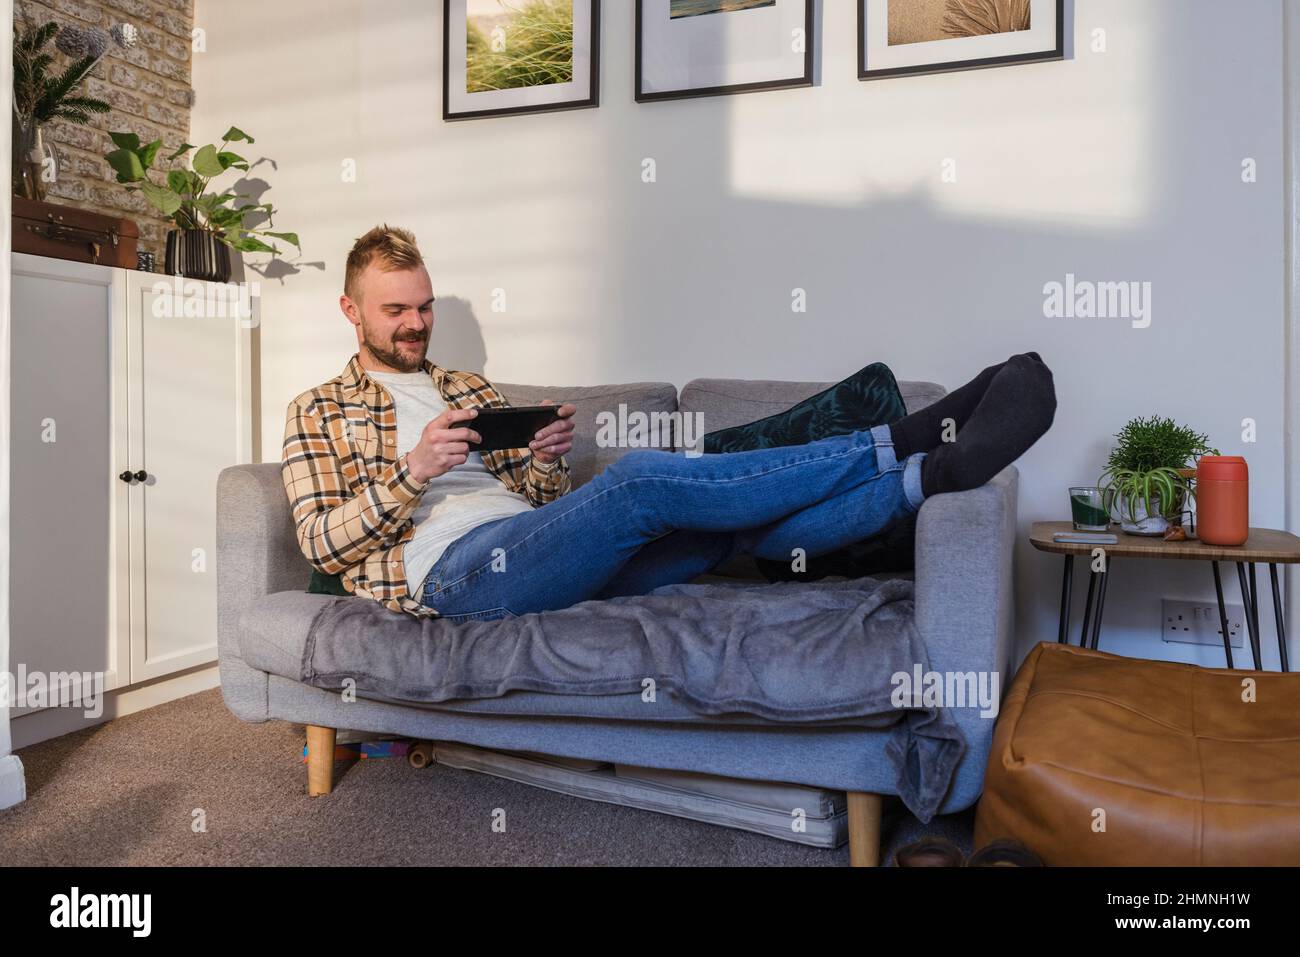 A side-view shot of a young man lying on his sofa in his living room relaxing, he is using his smart phone. Stock Photo